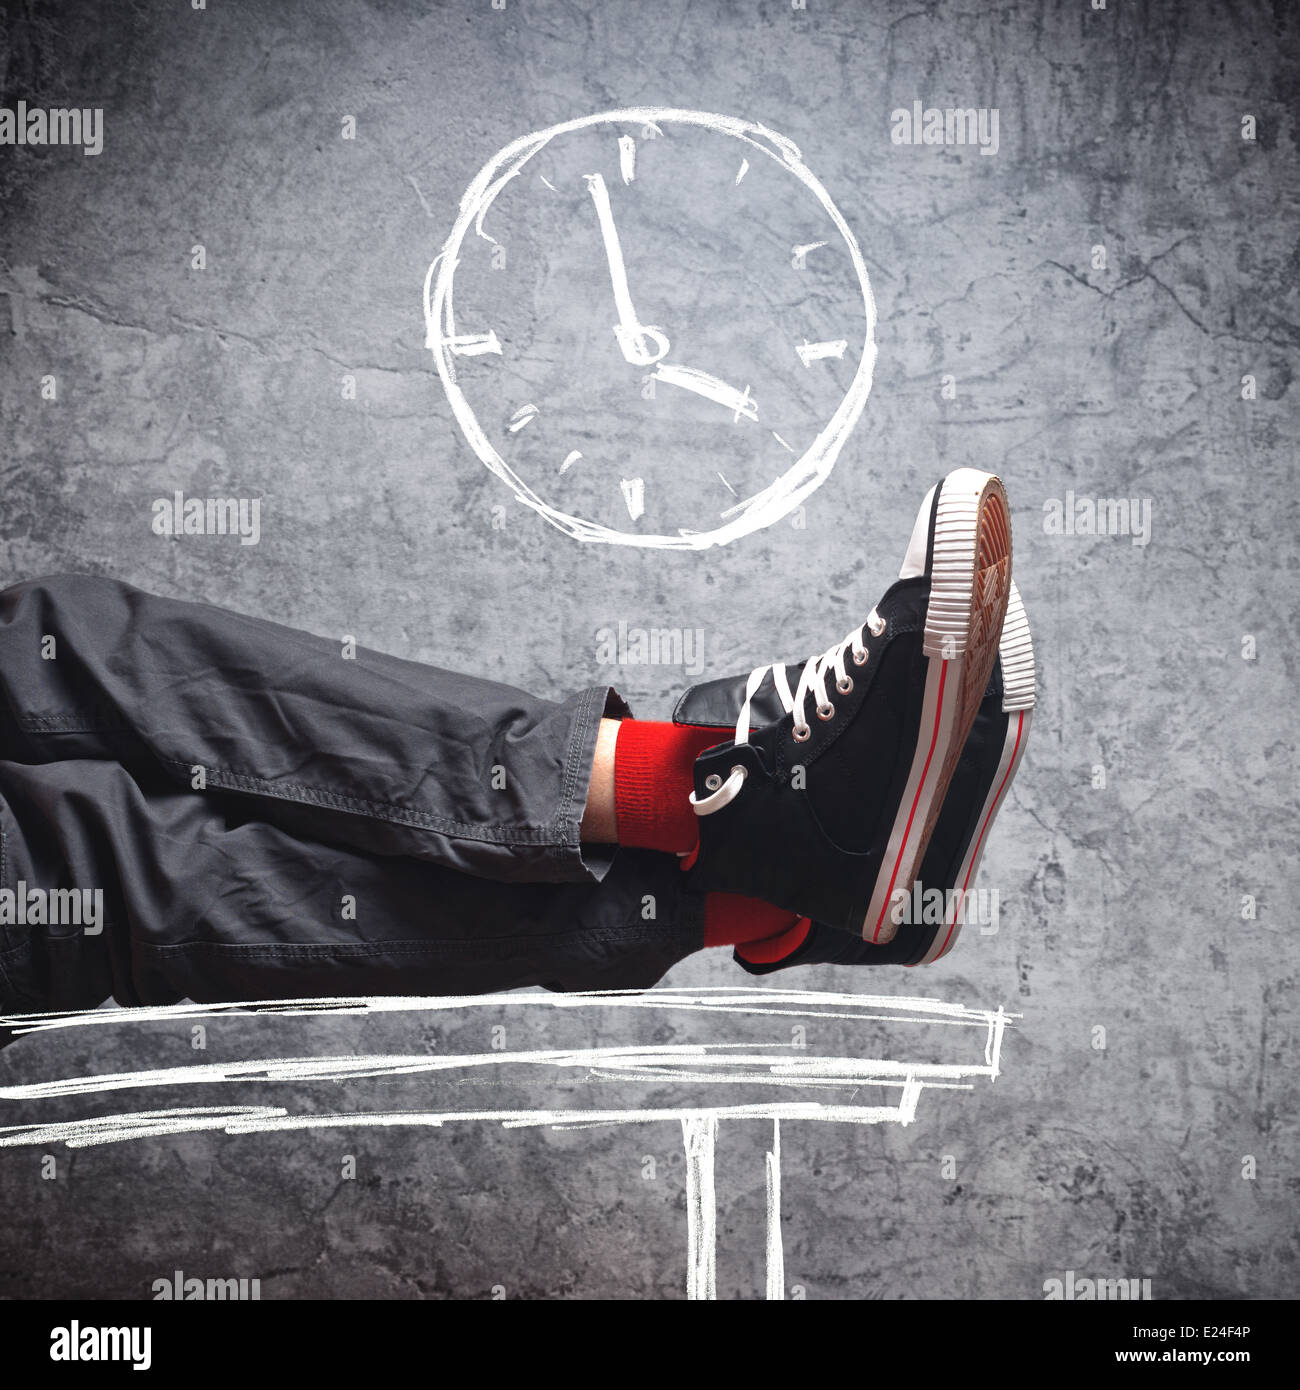 Workday end. Lazy man in sneakers with his legs on the table, few minutes till the end of his working hours. Stock Photo